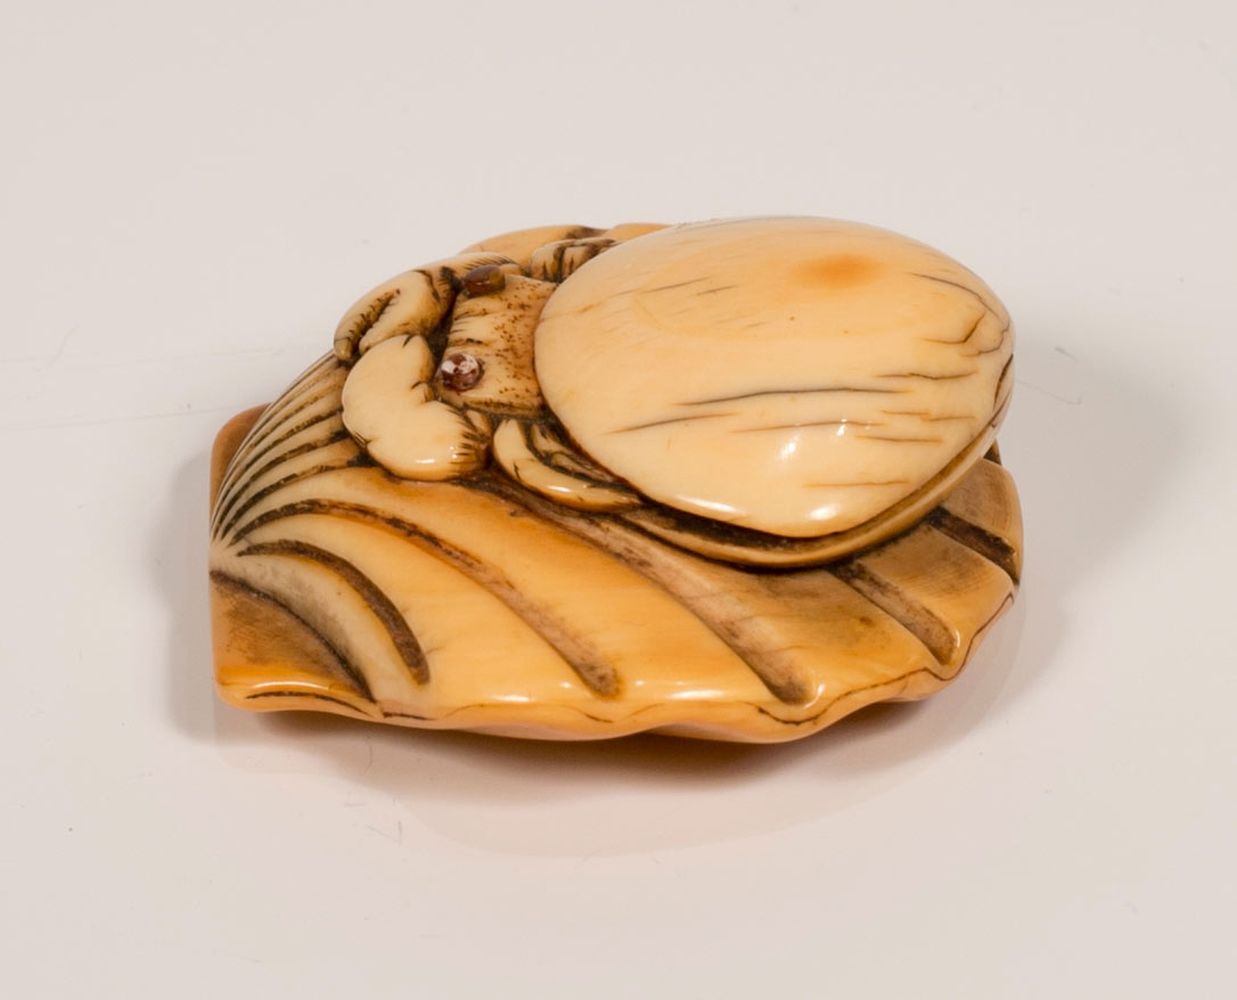 A JAPANESE EDO PERIOD CARVED IVORY NETSUKE OF CRAB & SHELLS, the crab upon the shell, the crabs eyes - Image 6 of 8